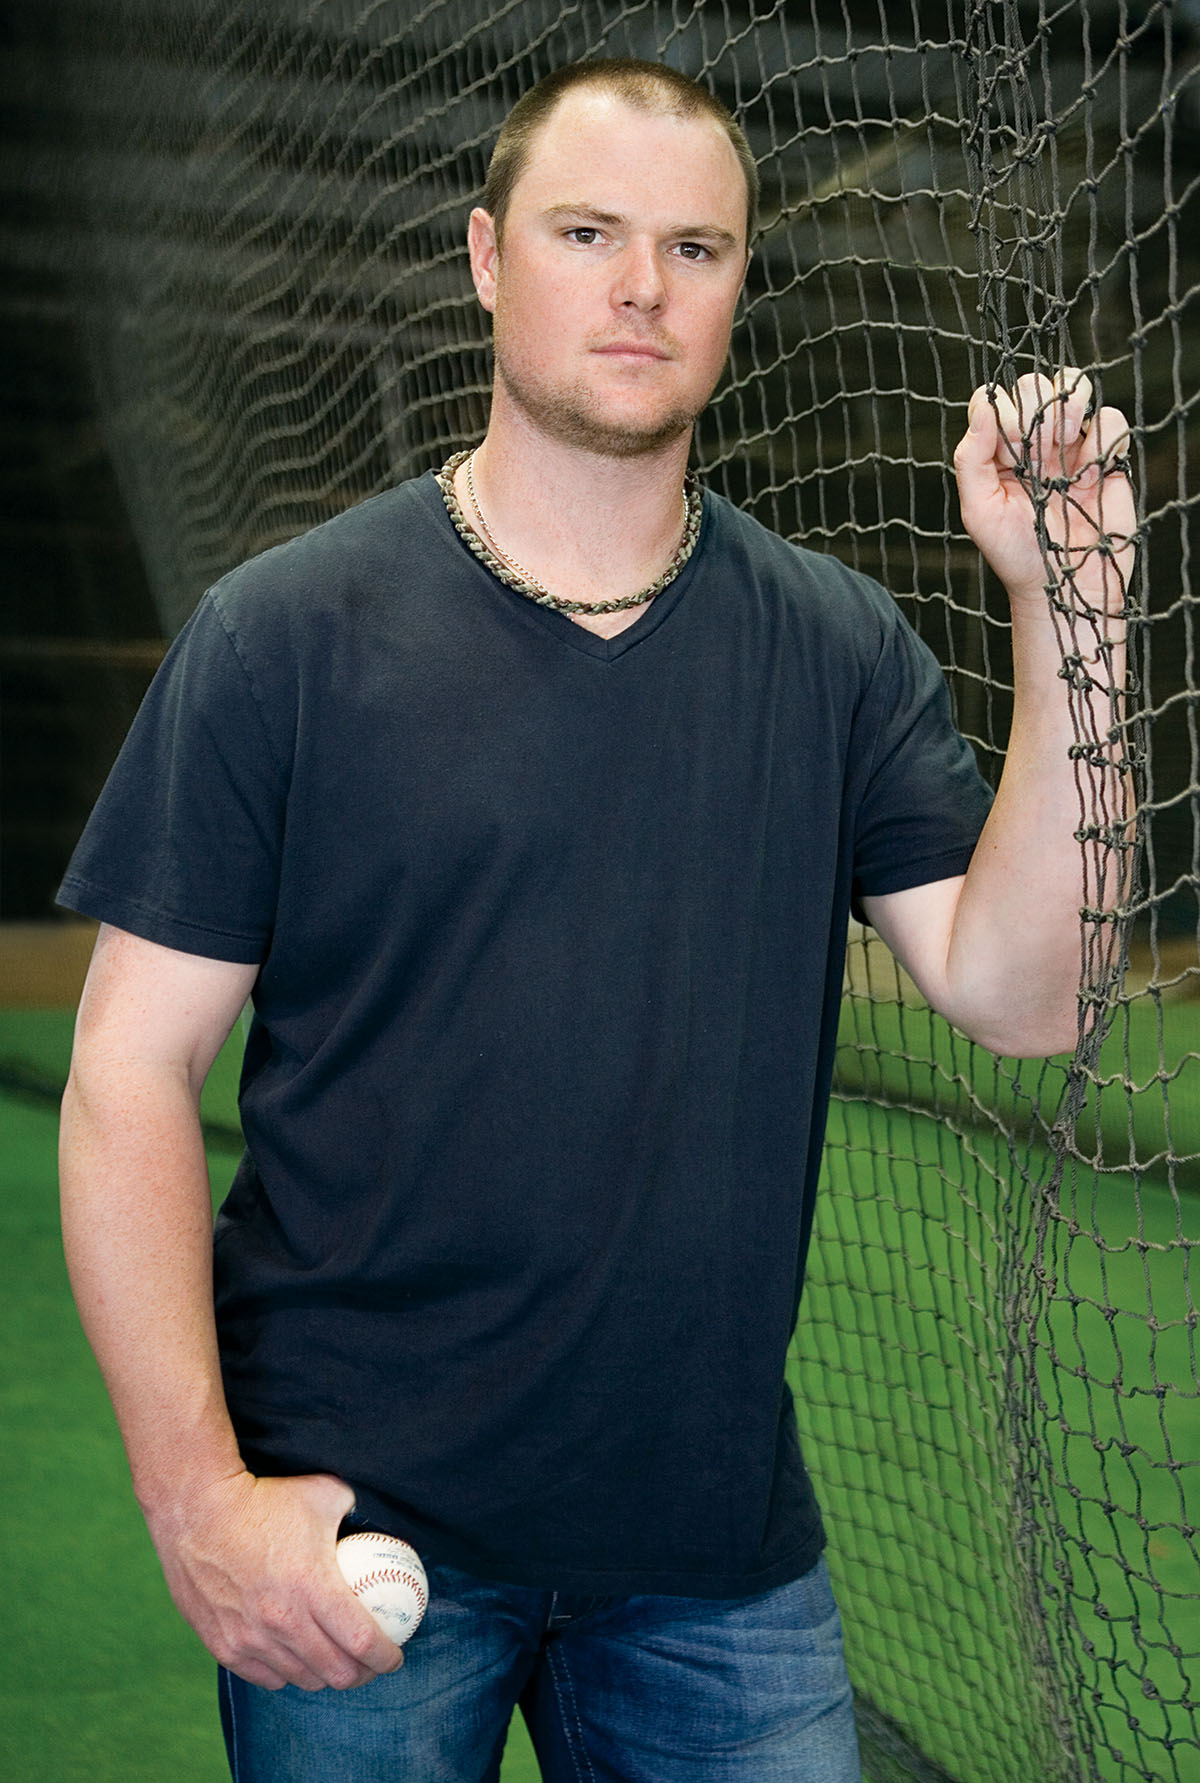 Jon Lester's job this year: lead the Sox to glory. / Photograph by Sadie Dayton.